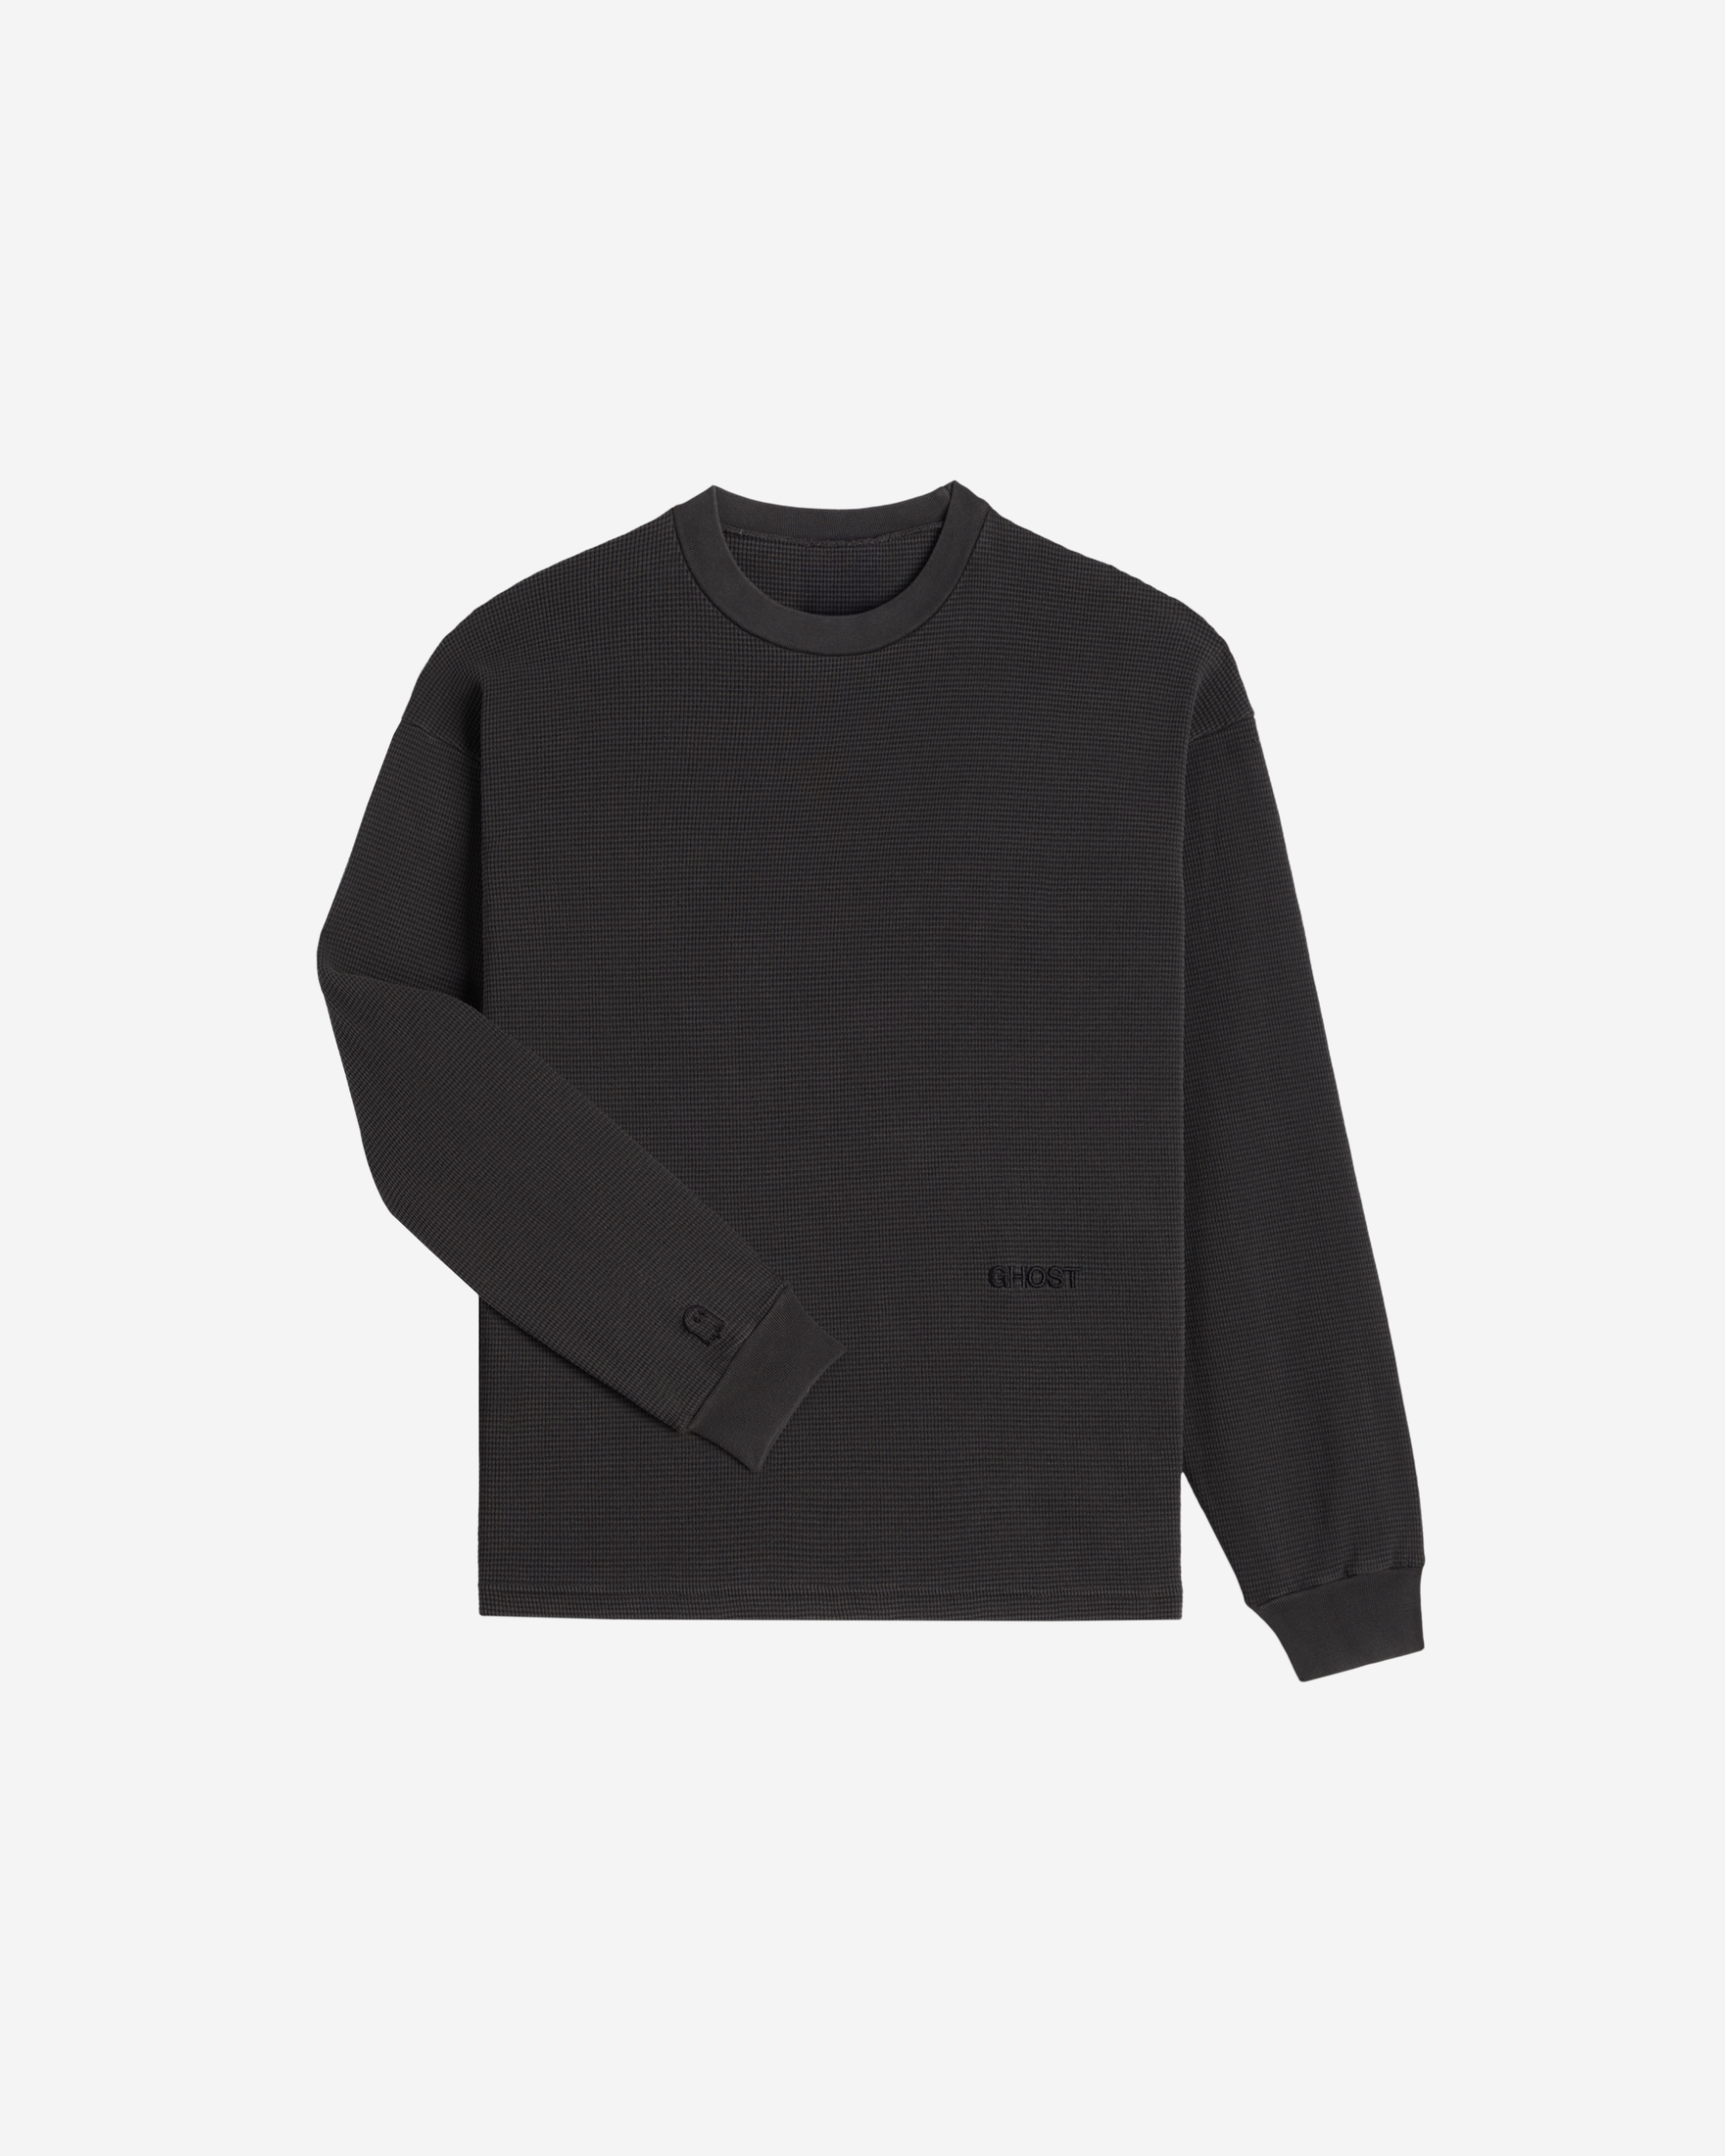 Daily's Thermal Long Sleeve